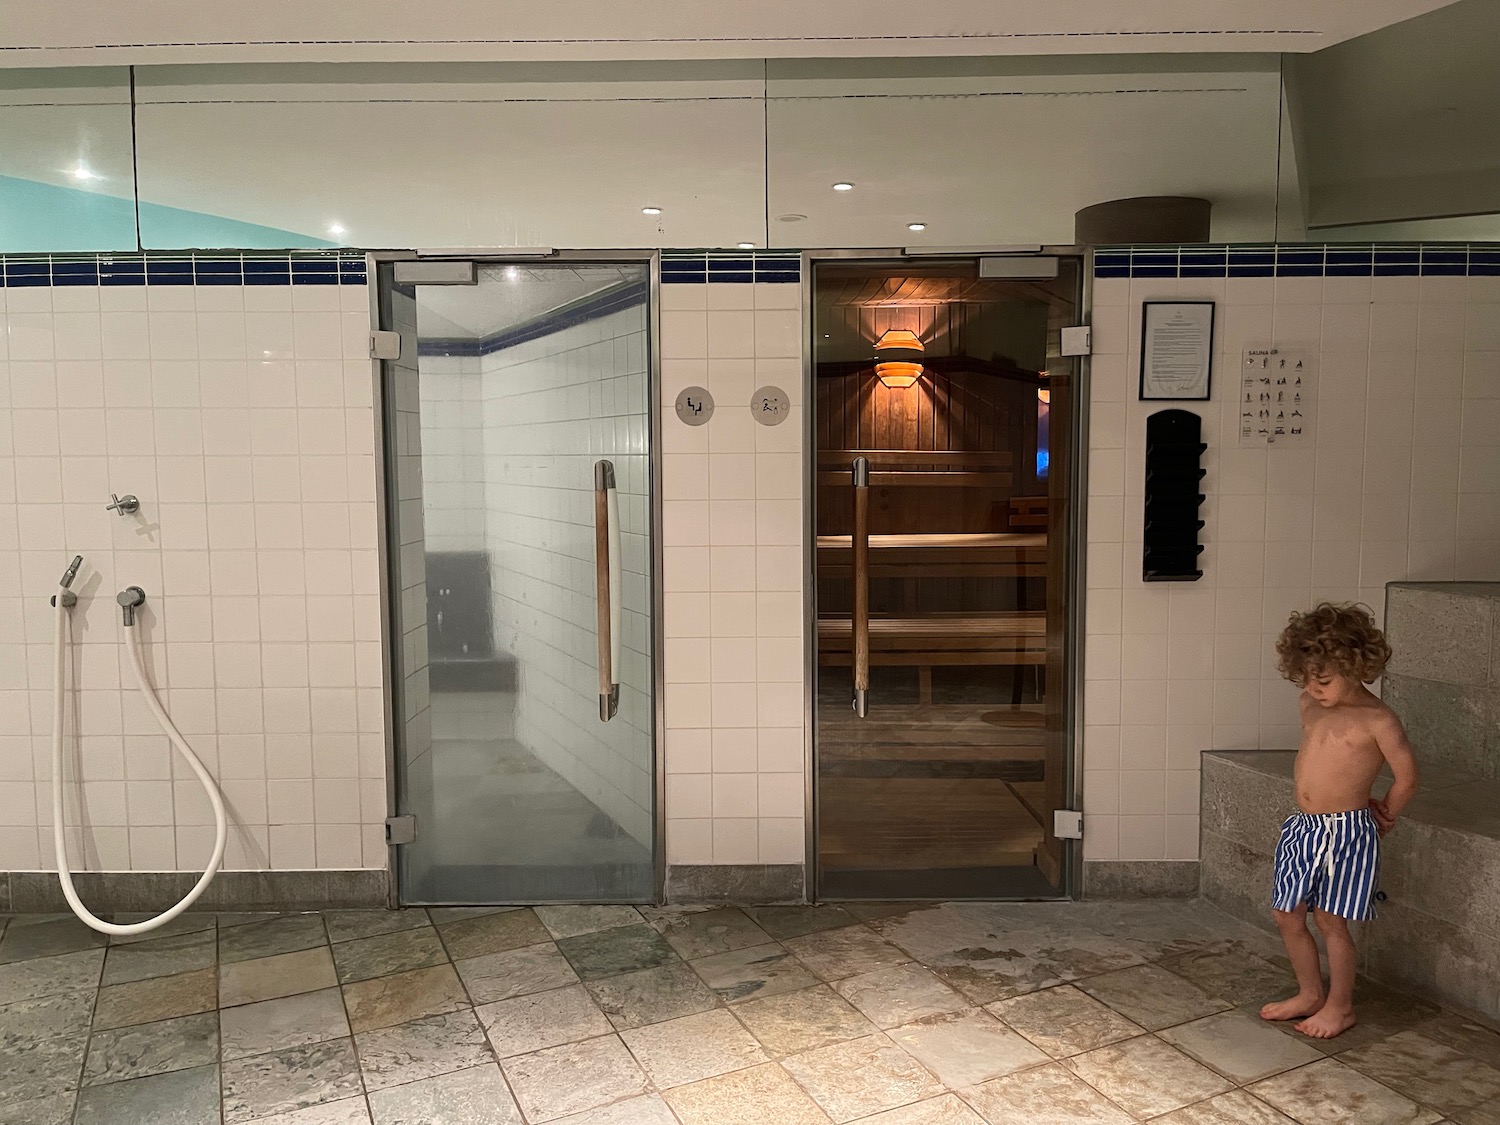 a child standing in a room with a sauna